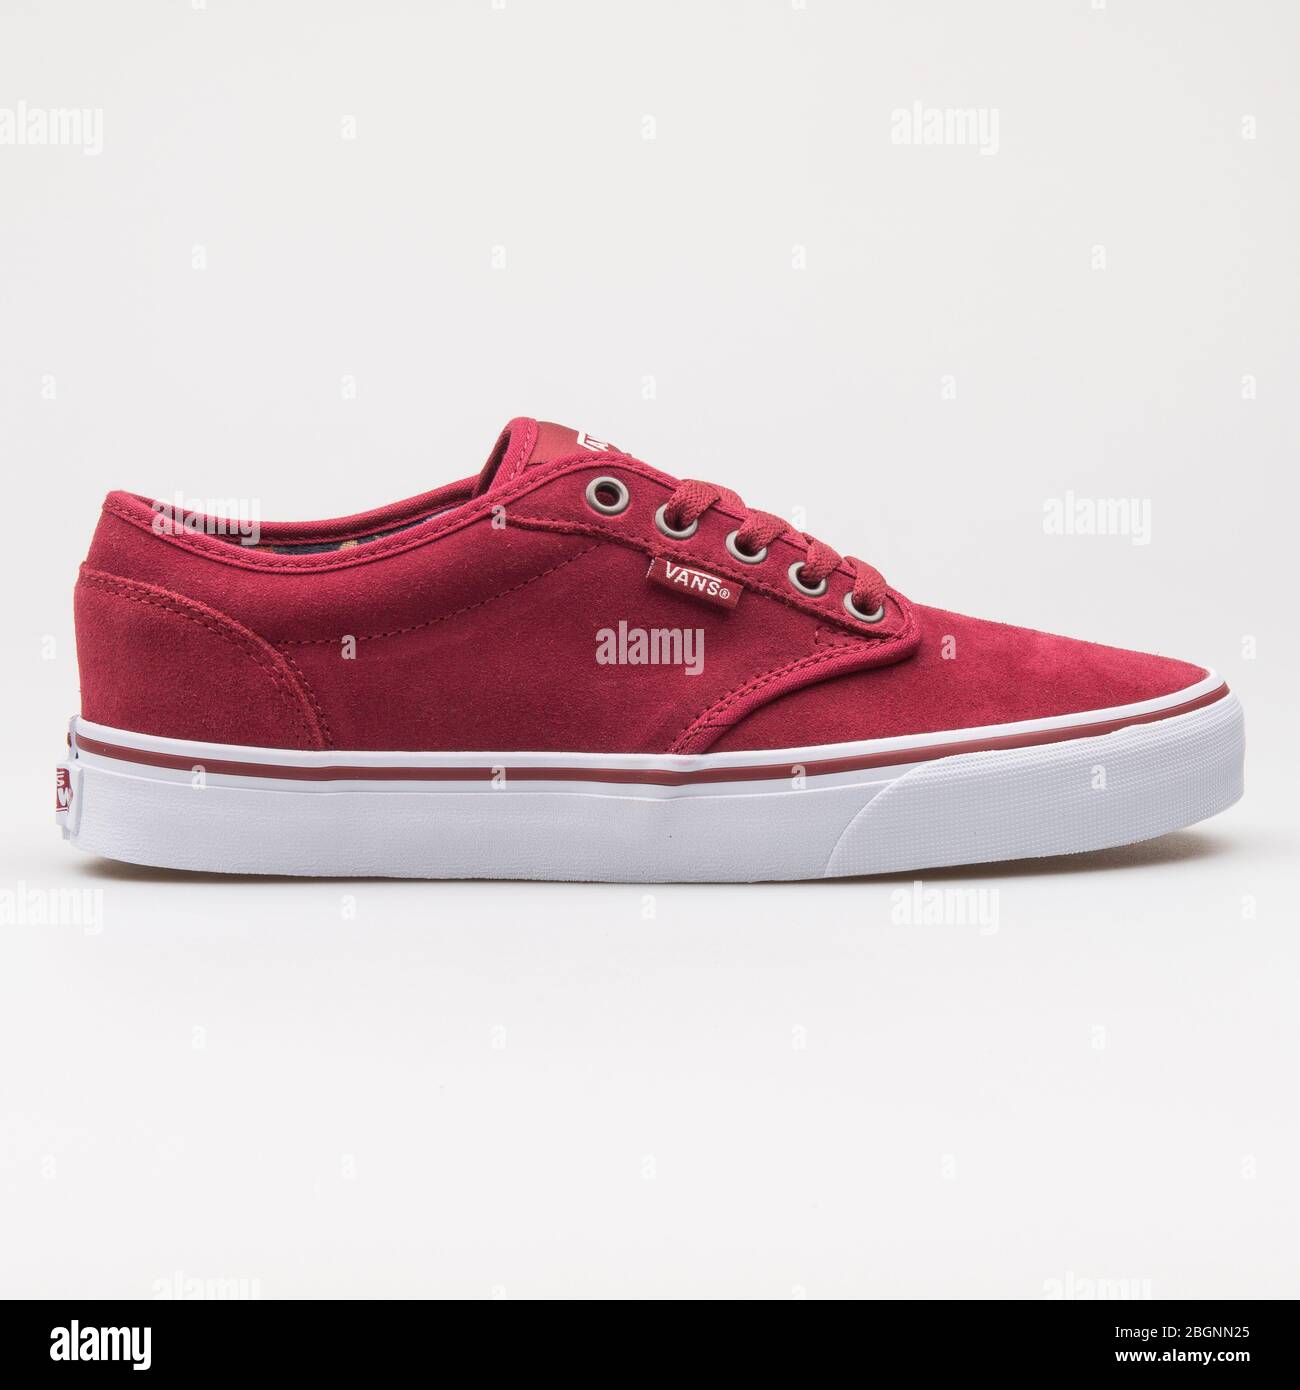 VIENNA, AUSTRIA AUGUST 14, 2017: Atwood red and white sneaker on white background Stock Photo - Alamy